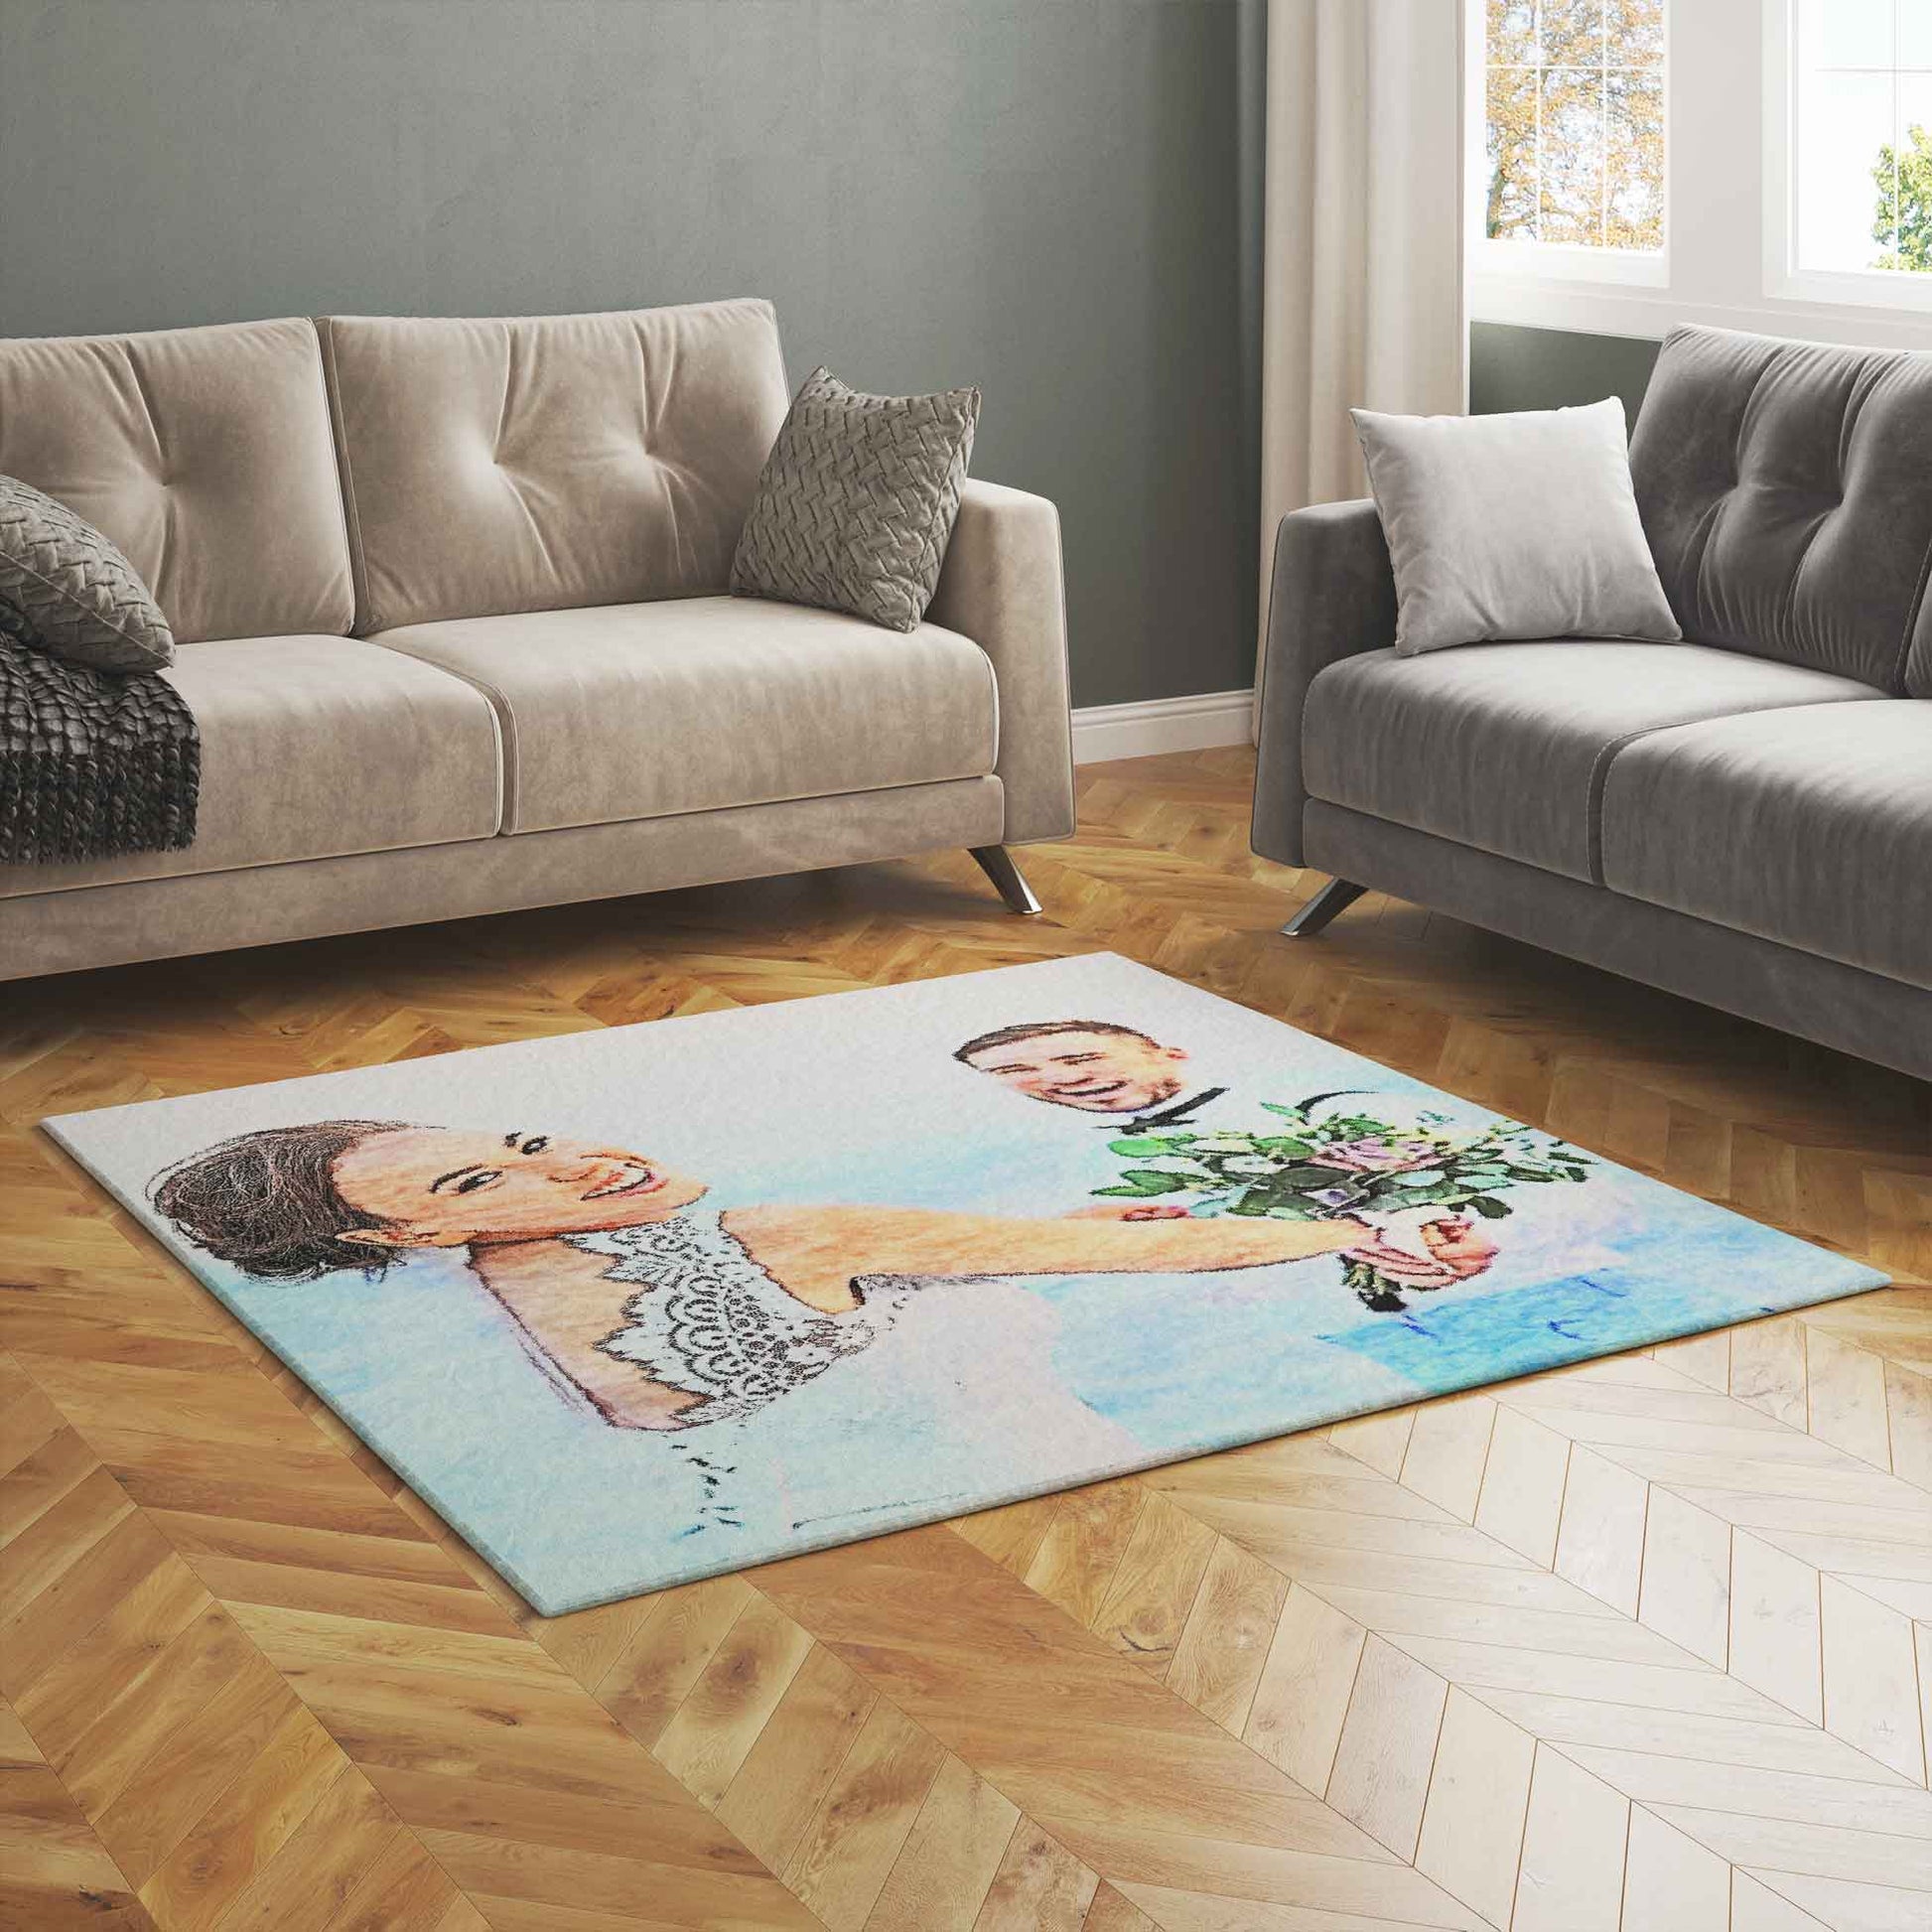 Transform your space with our Personalised Watercolour Photo Rug. Dive into luxury with customisable designs that evoke timeless beauty